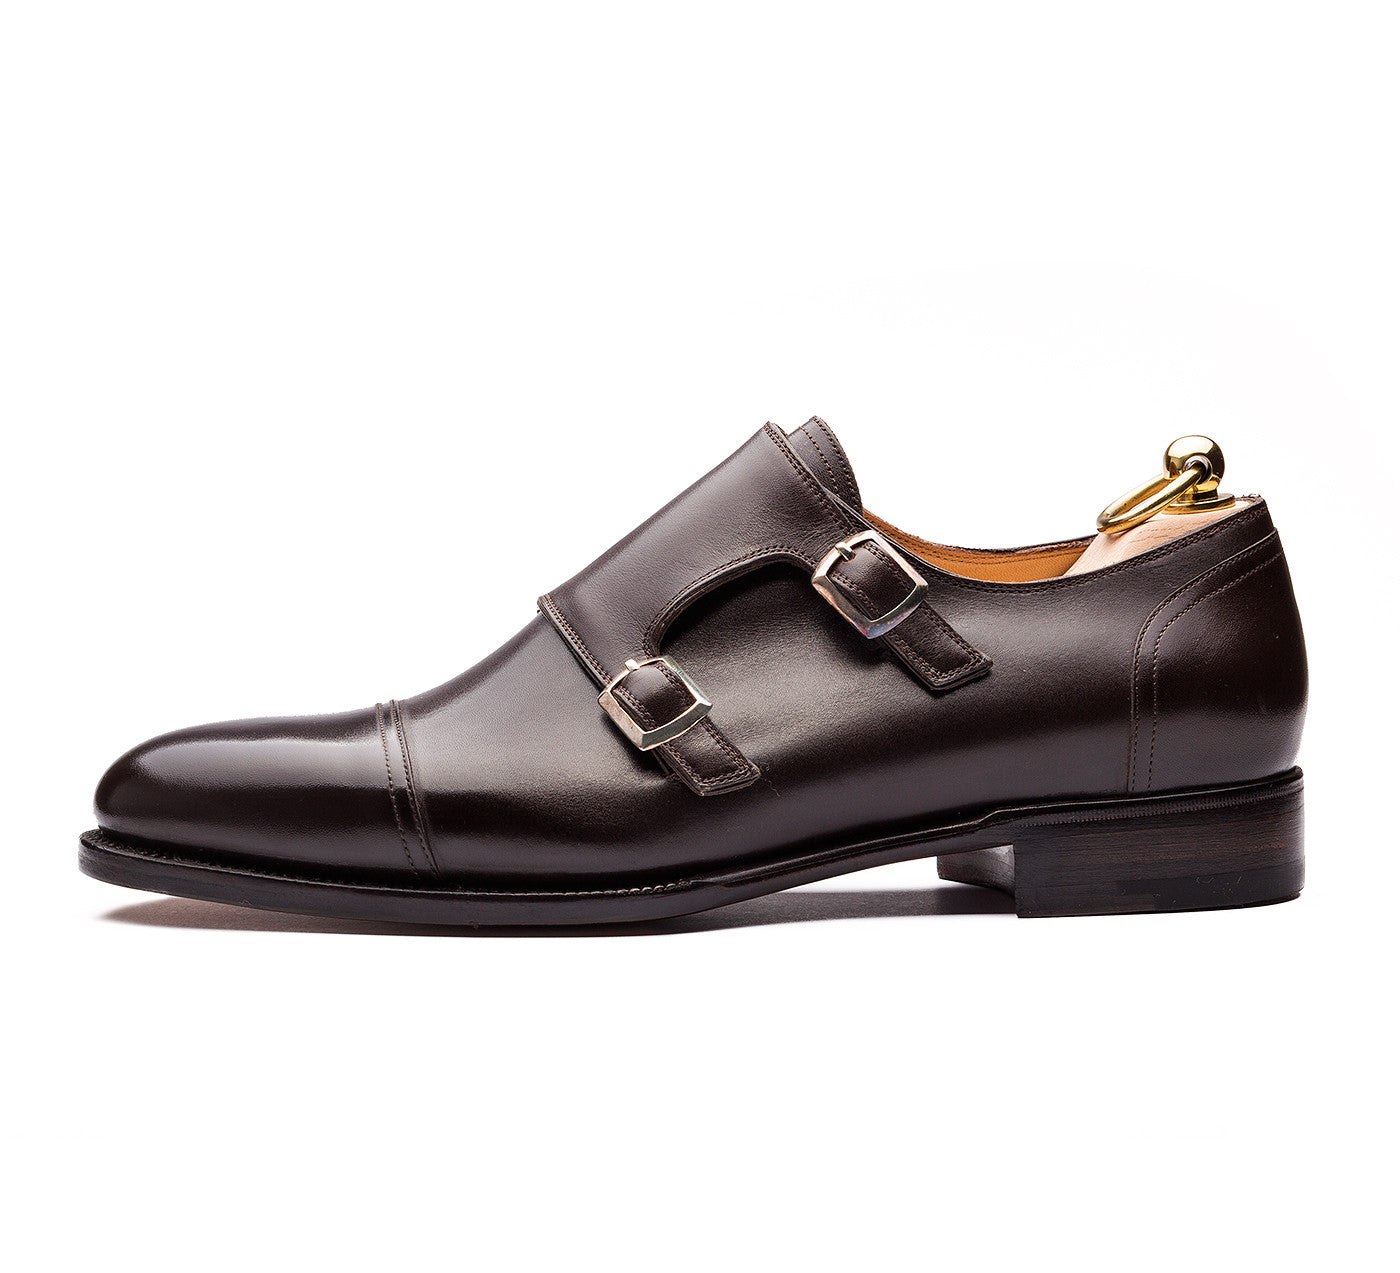 Stefano Bemer Style 2301 - T.Moro Calf - Side view